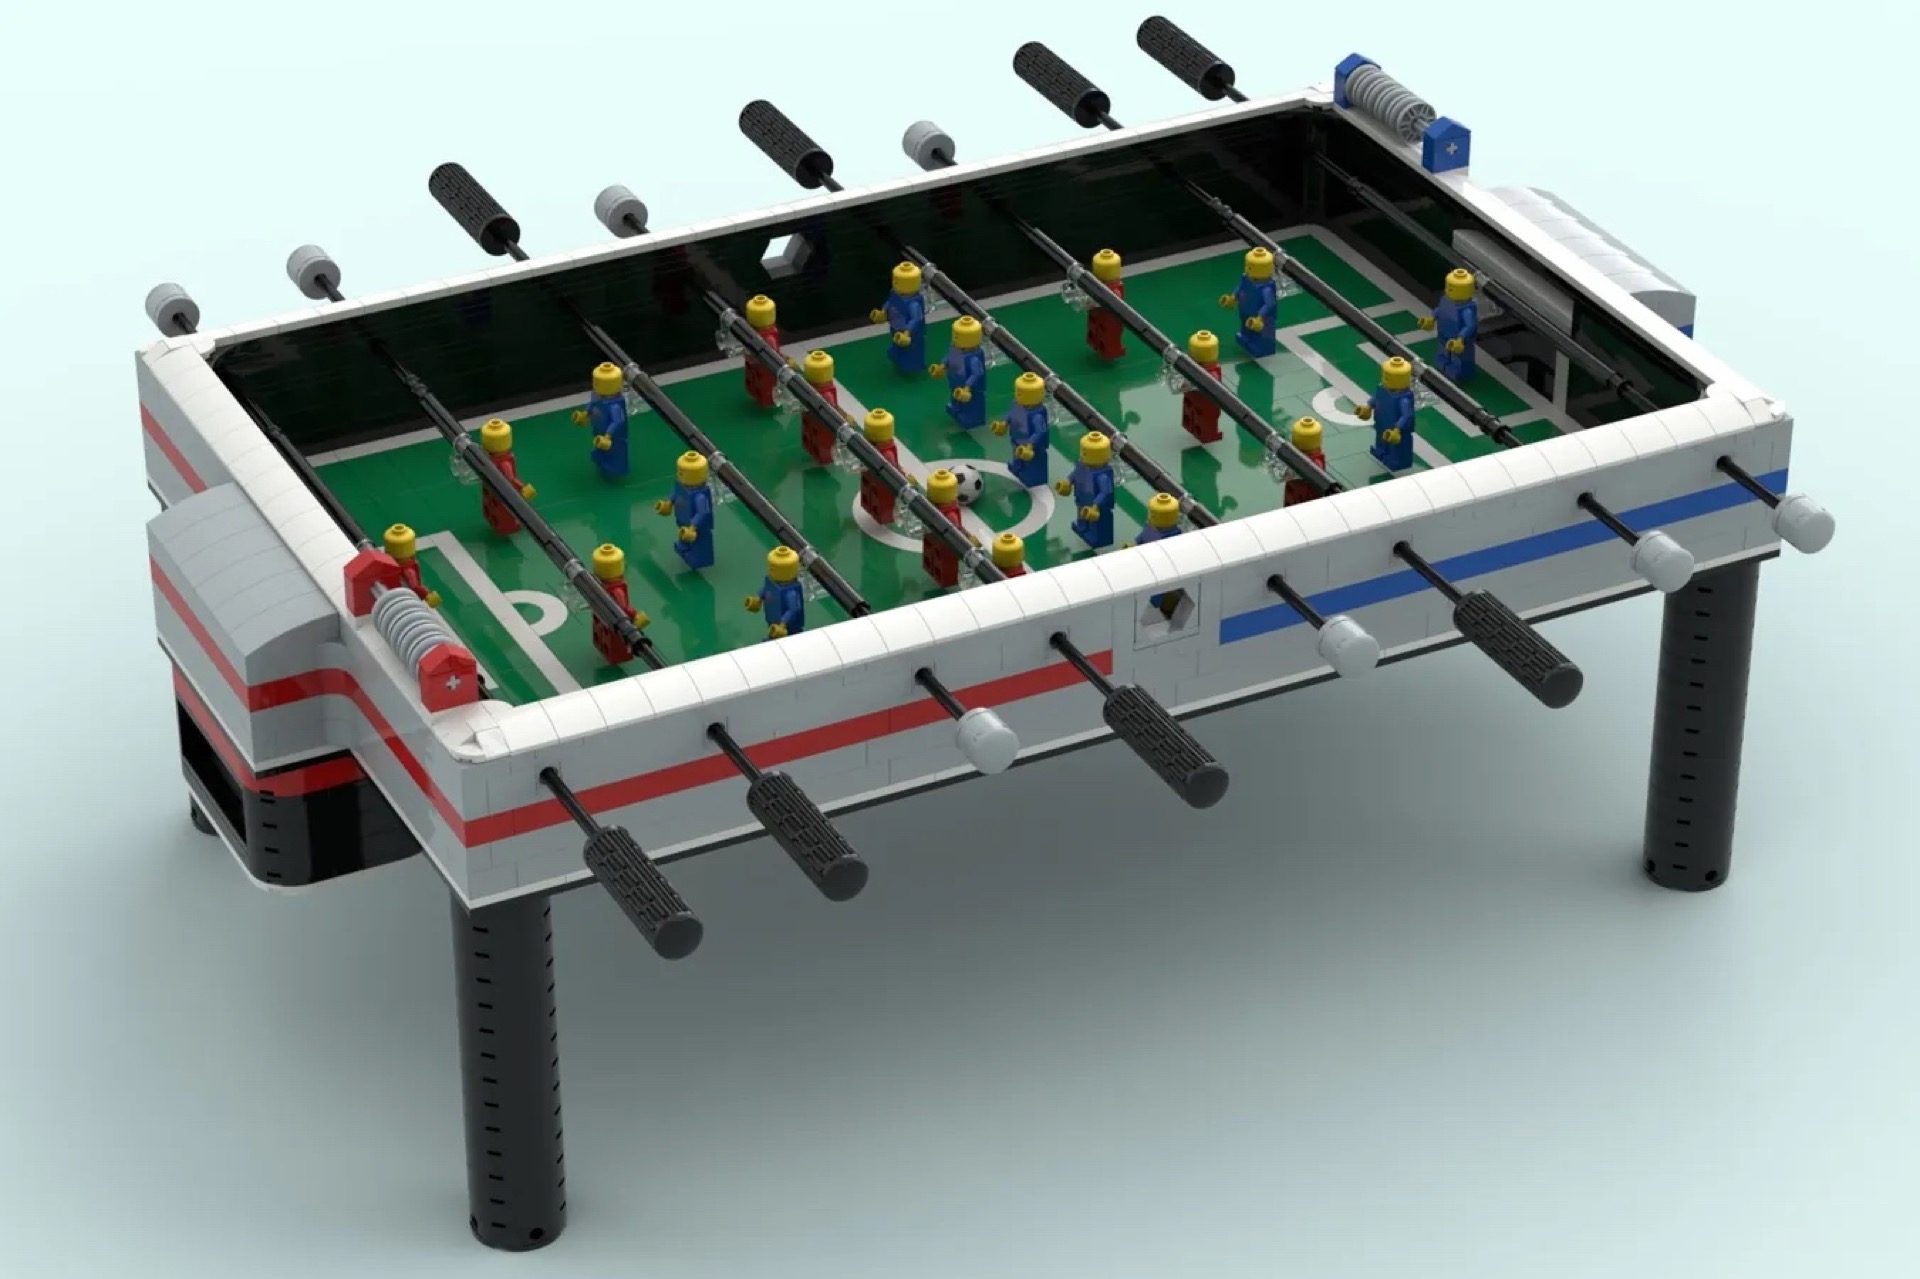 Inhibere udvikling Afbrydelse $250 Lego foosball table includes a whopping 22 minifigs, actually works |  Ars Technica